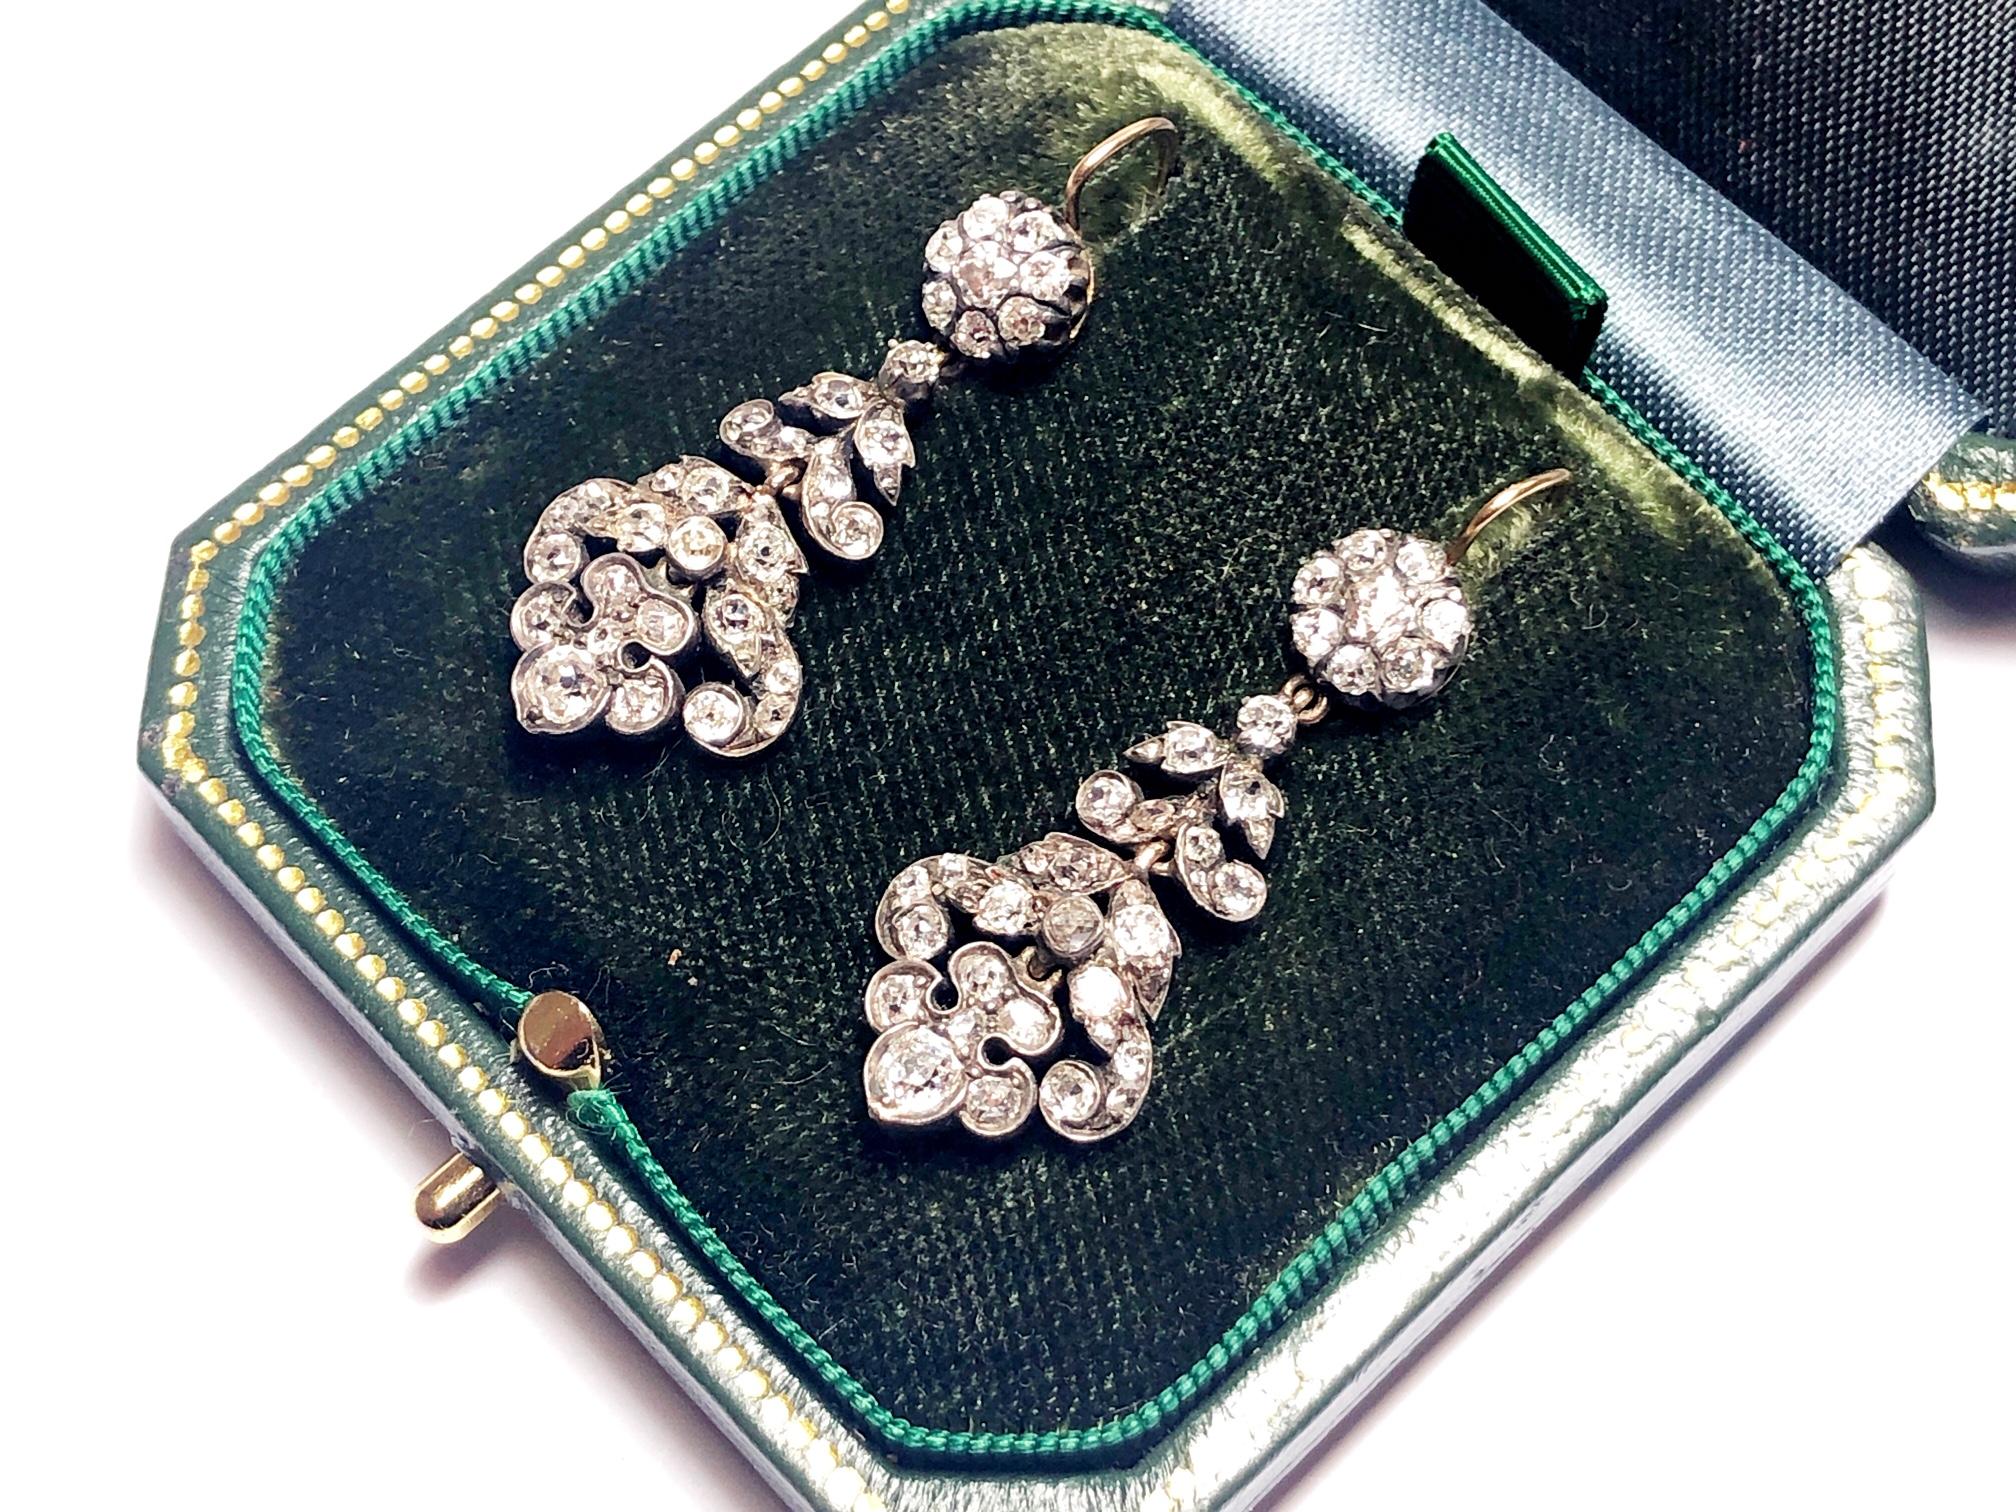 An antique pair of old-cut diamond earrings, with cluster tops and foliate drops, mounted in silver-upon-gold.